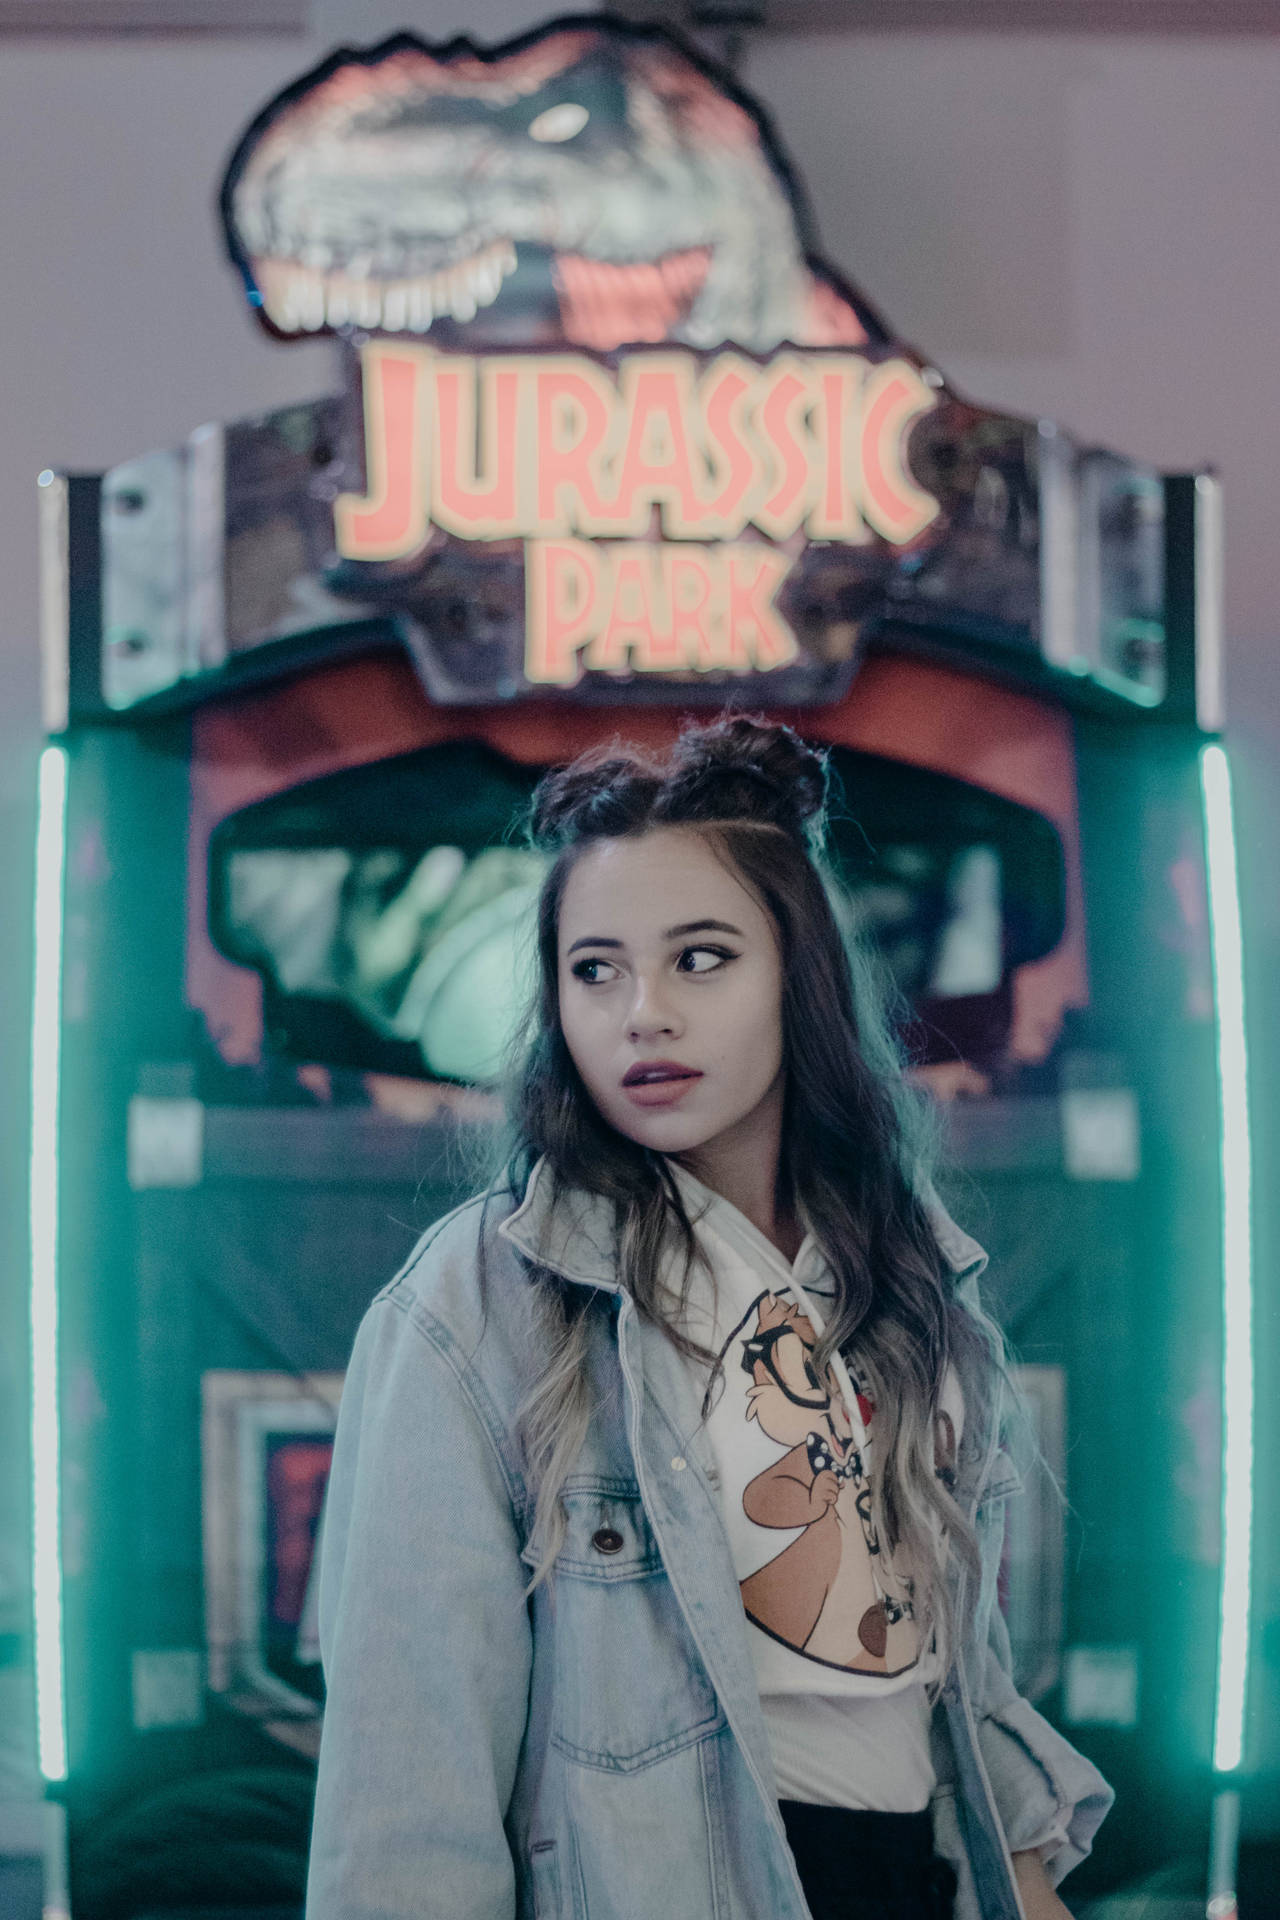 Cool Girl In Jurassic Park Arcade Background